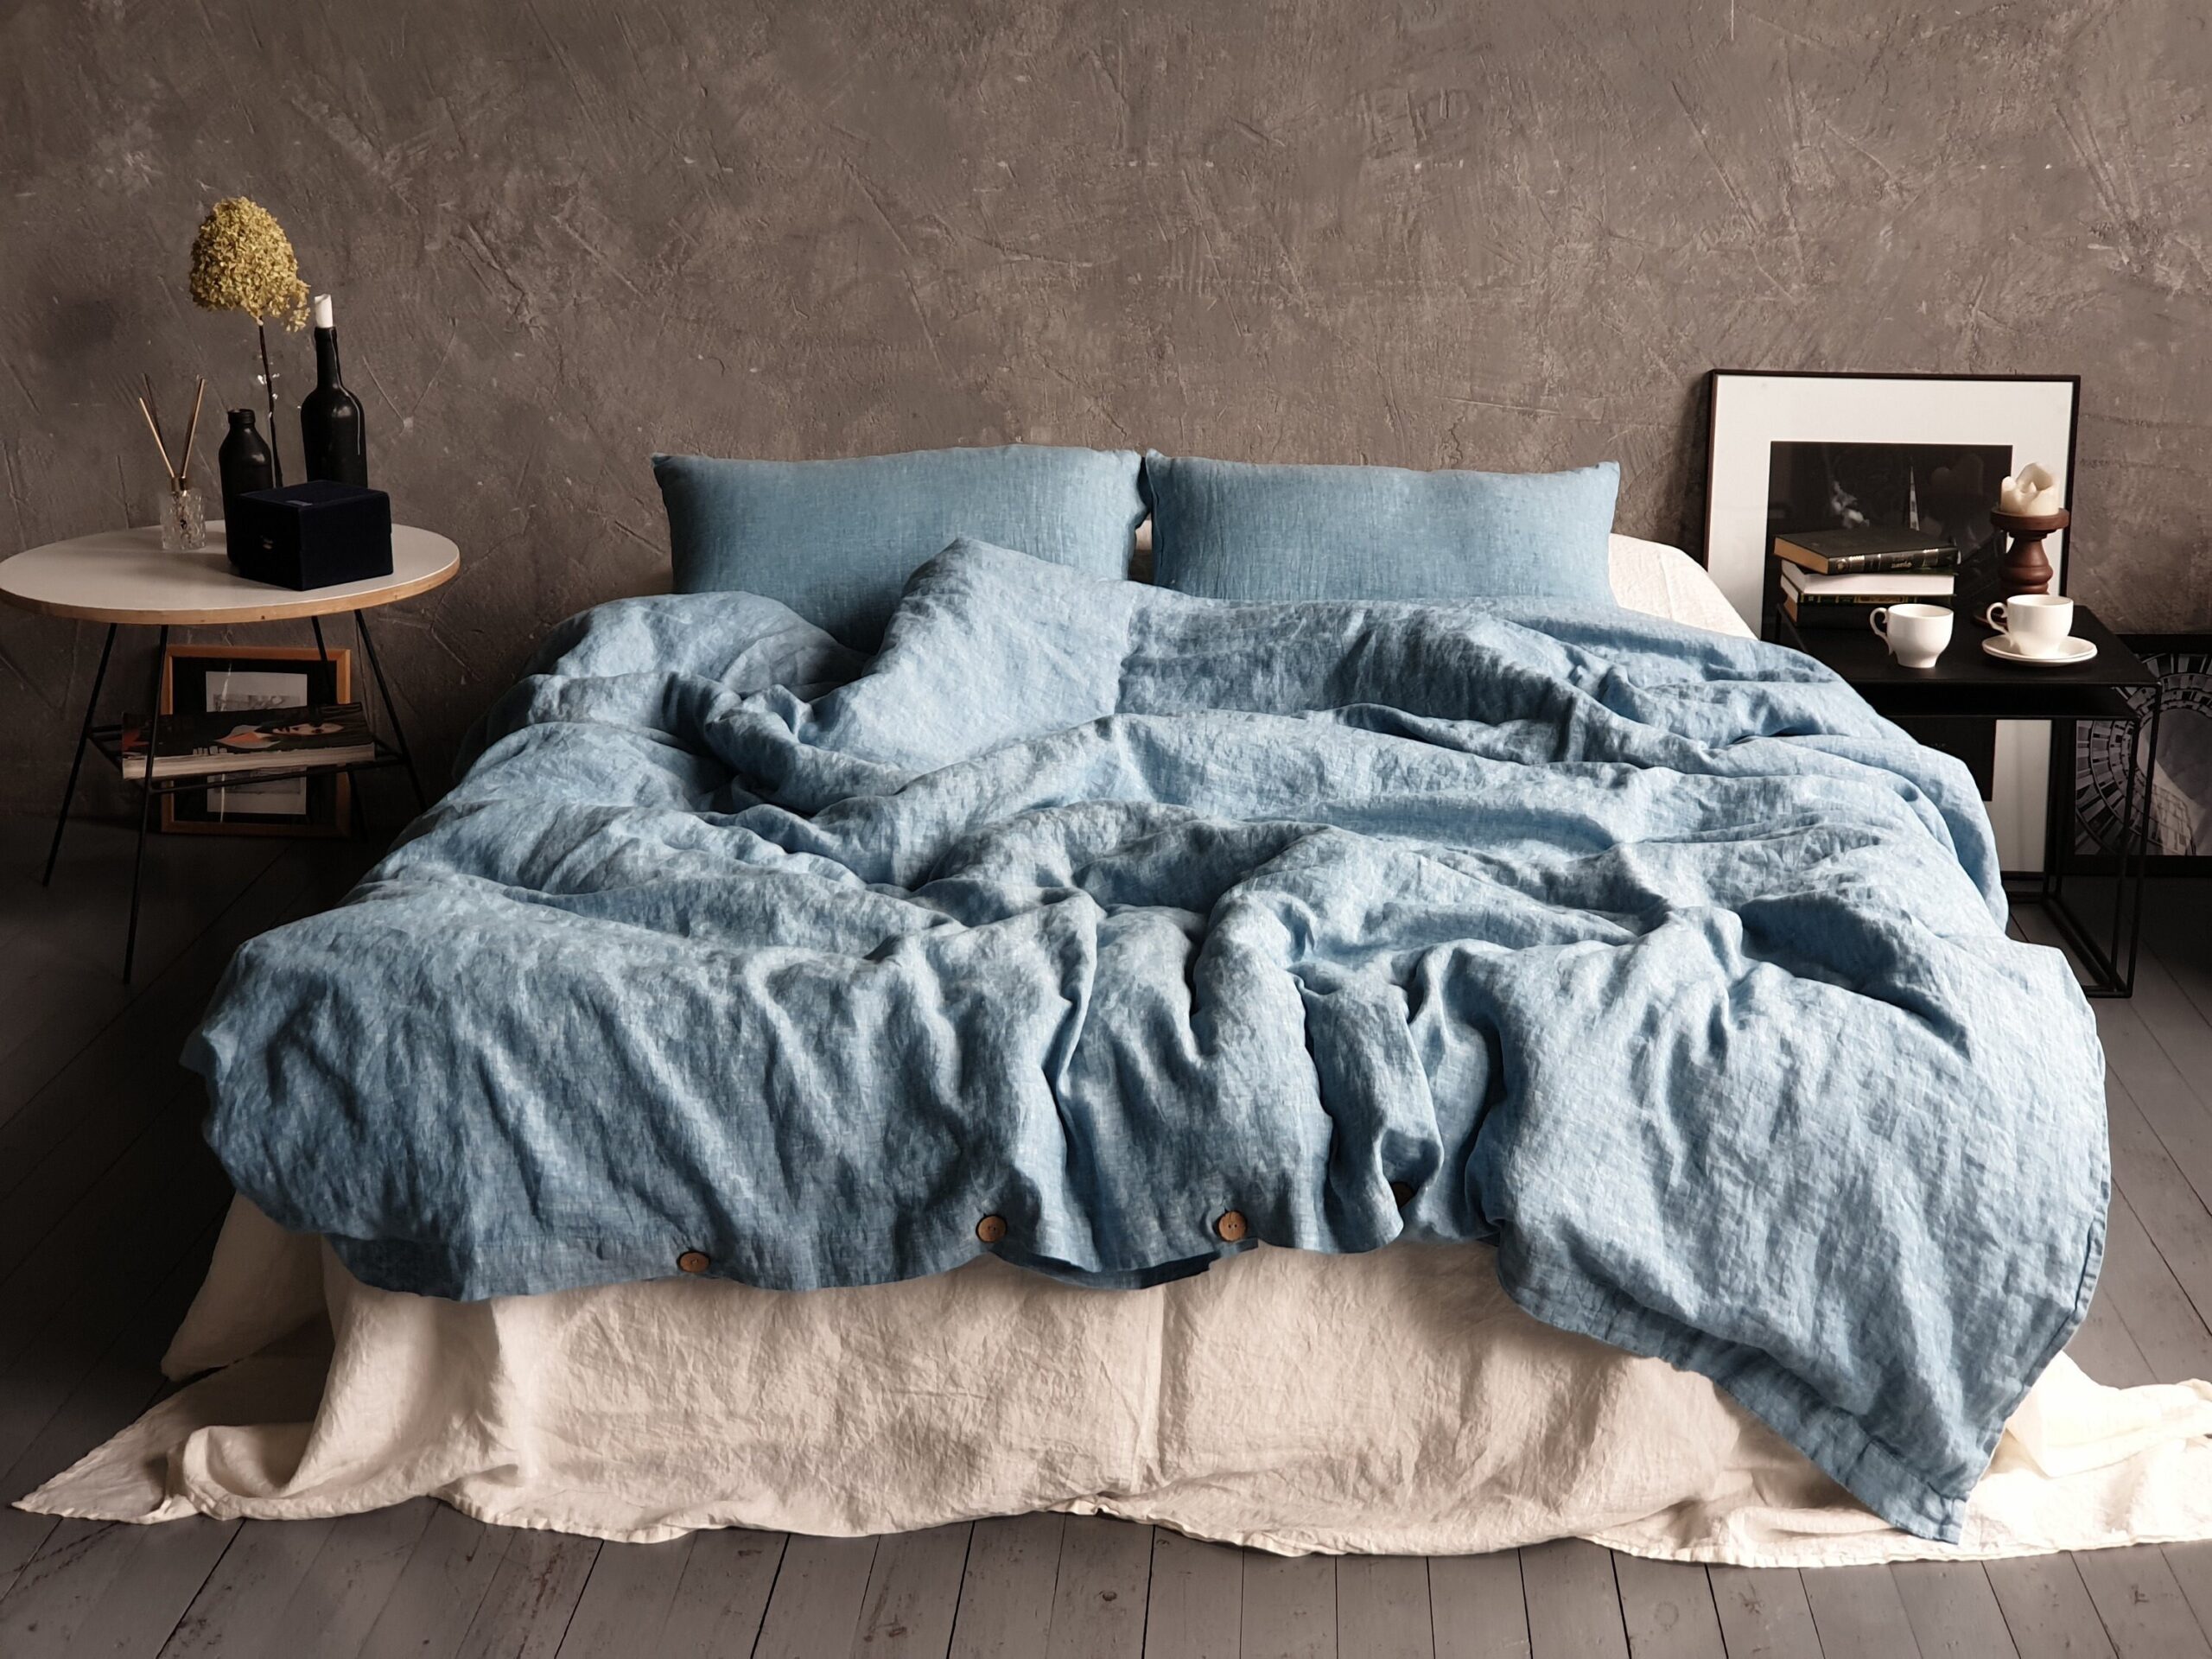 Elevate Your Sleep with Organic Cotton Sheets!